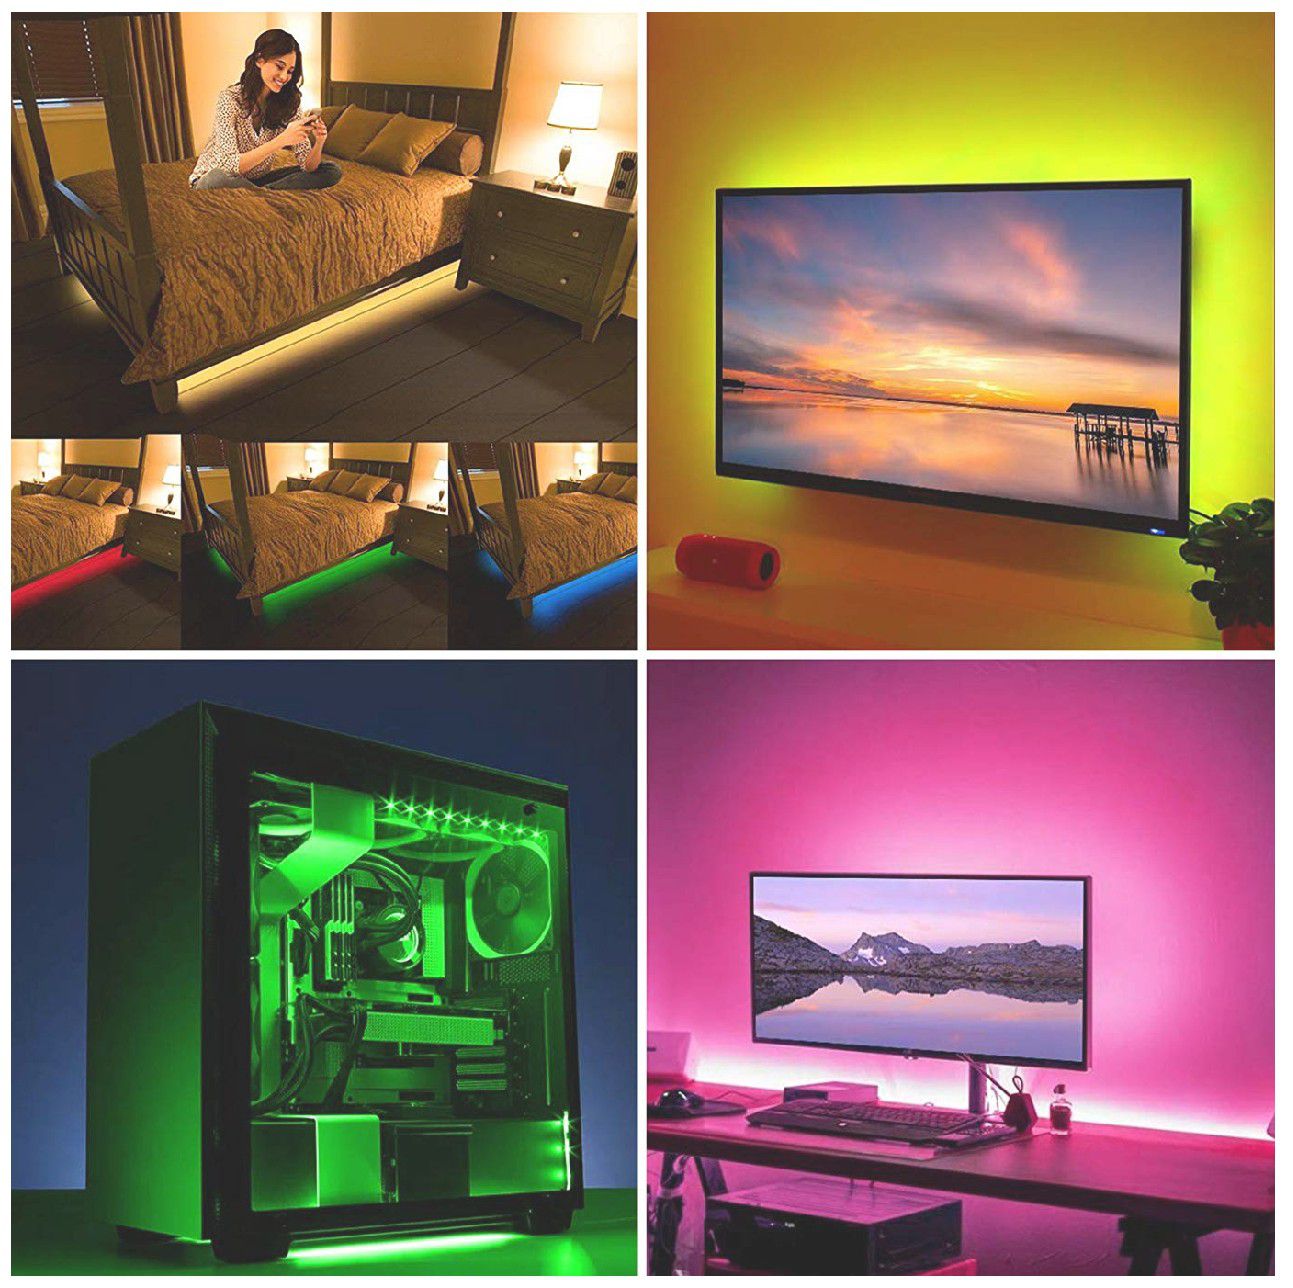 🚨TV BACKLIGHT LED STRIP KIT! USB POWERED. REMOTE CONTROL COLOR CHANGE. COMPUTER/ MIRRORS/ UNDER BED/ CLOSET LIGHT (2M/6FT)🚨